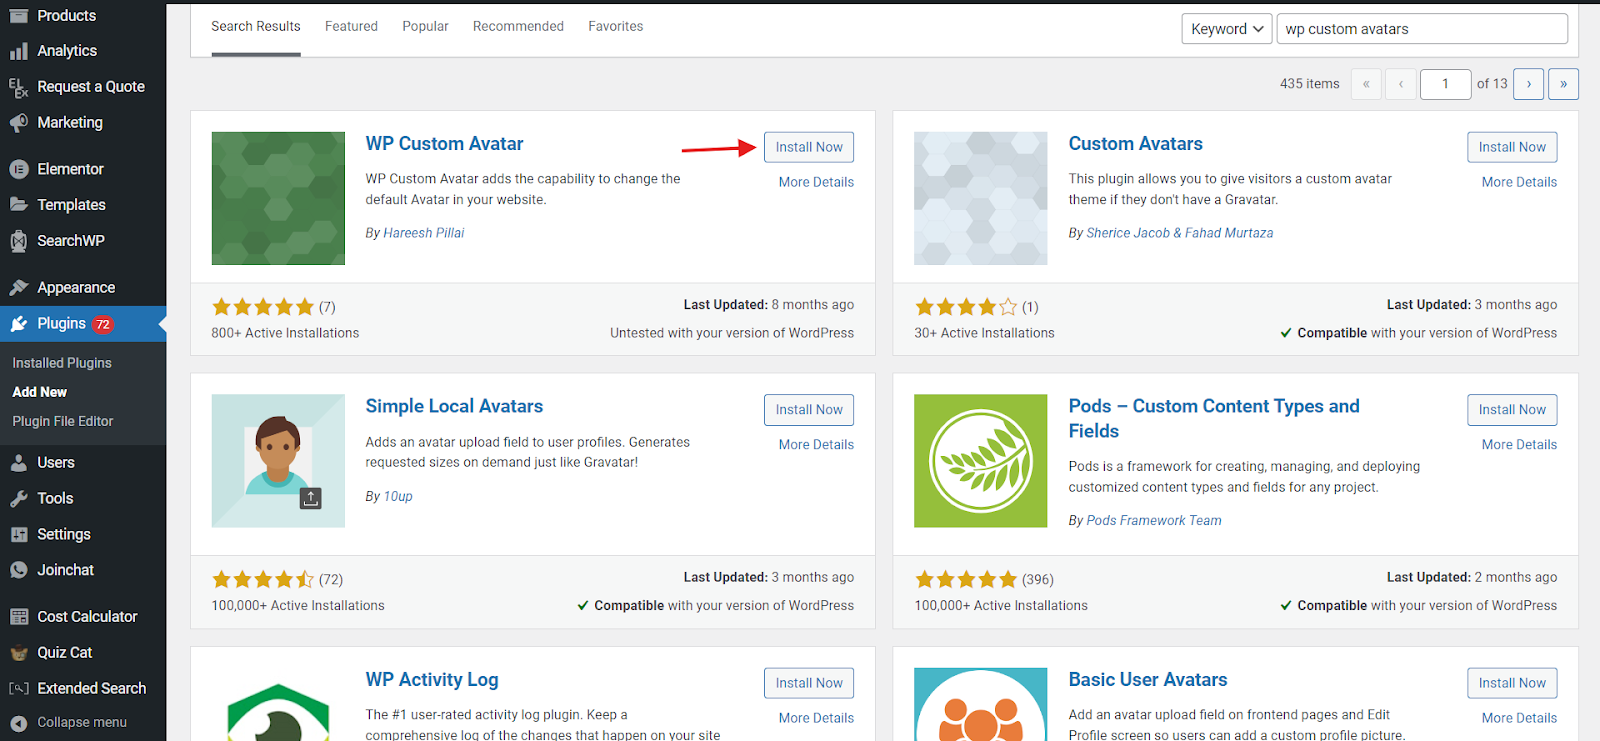 Installing and activating the WP Custom Avatars plugin